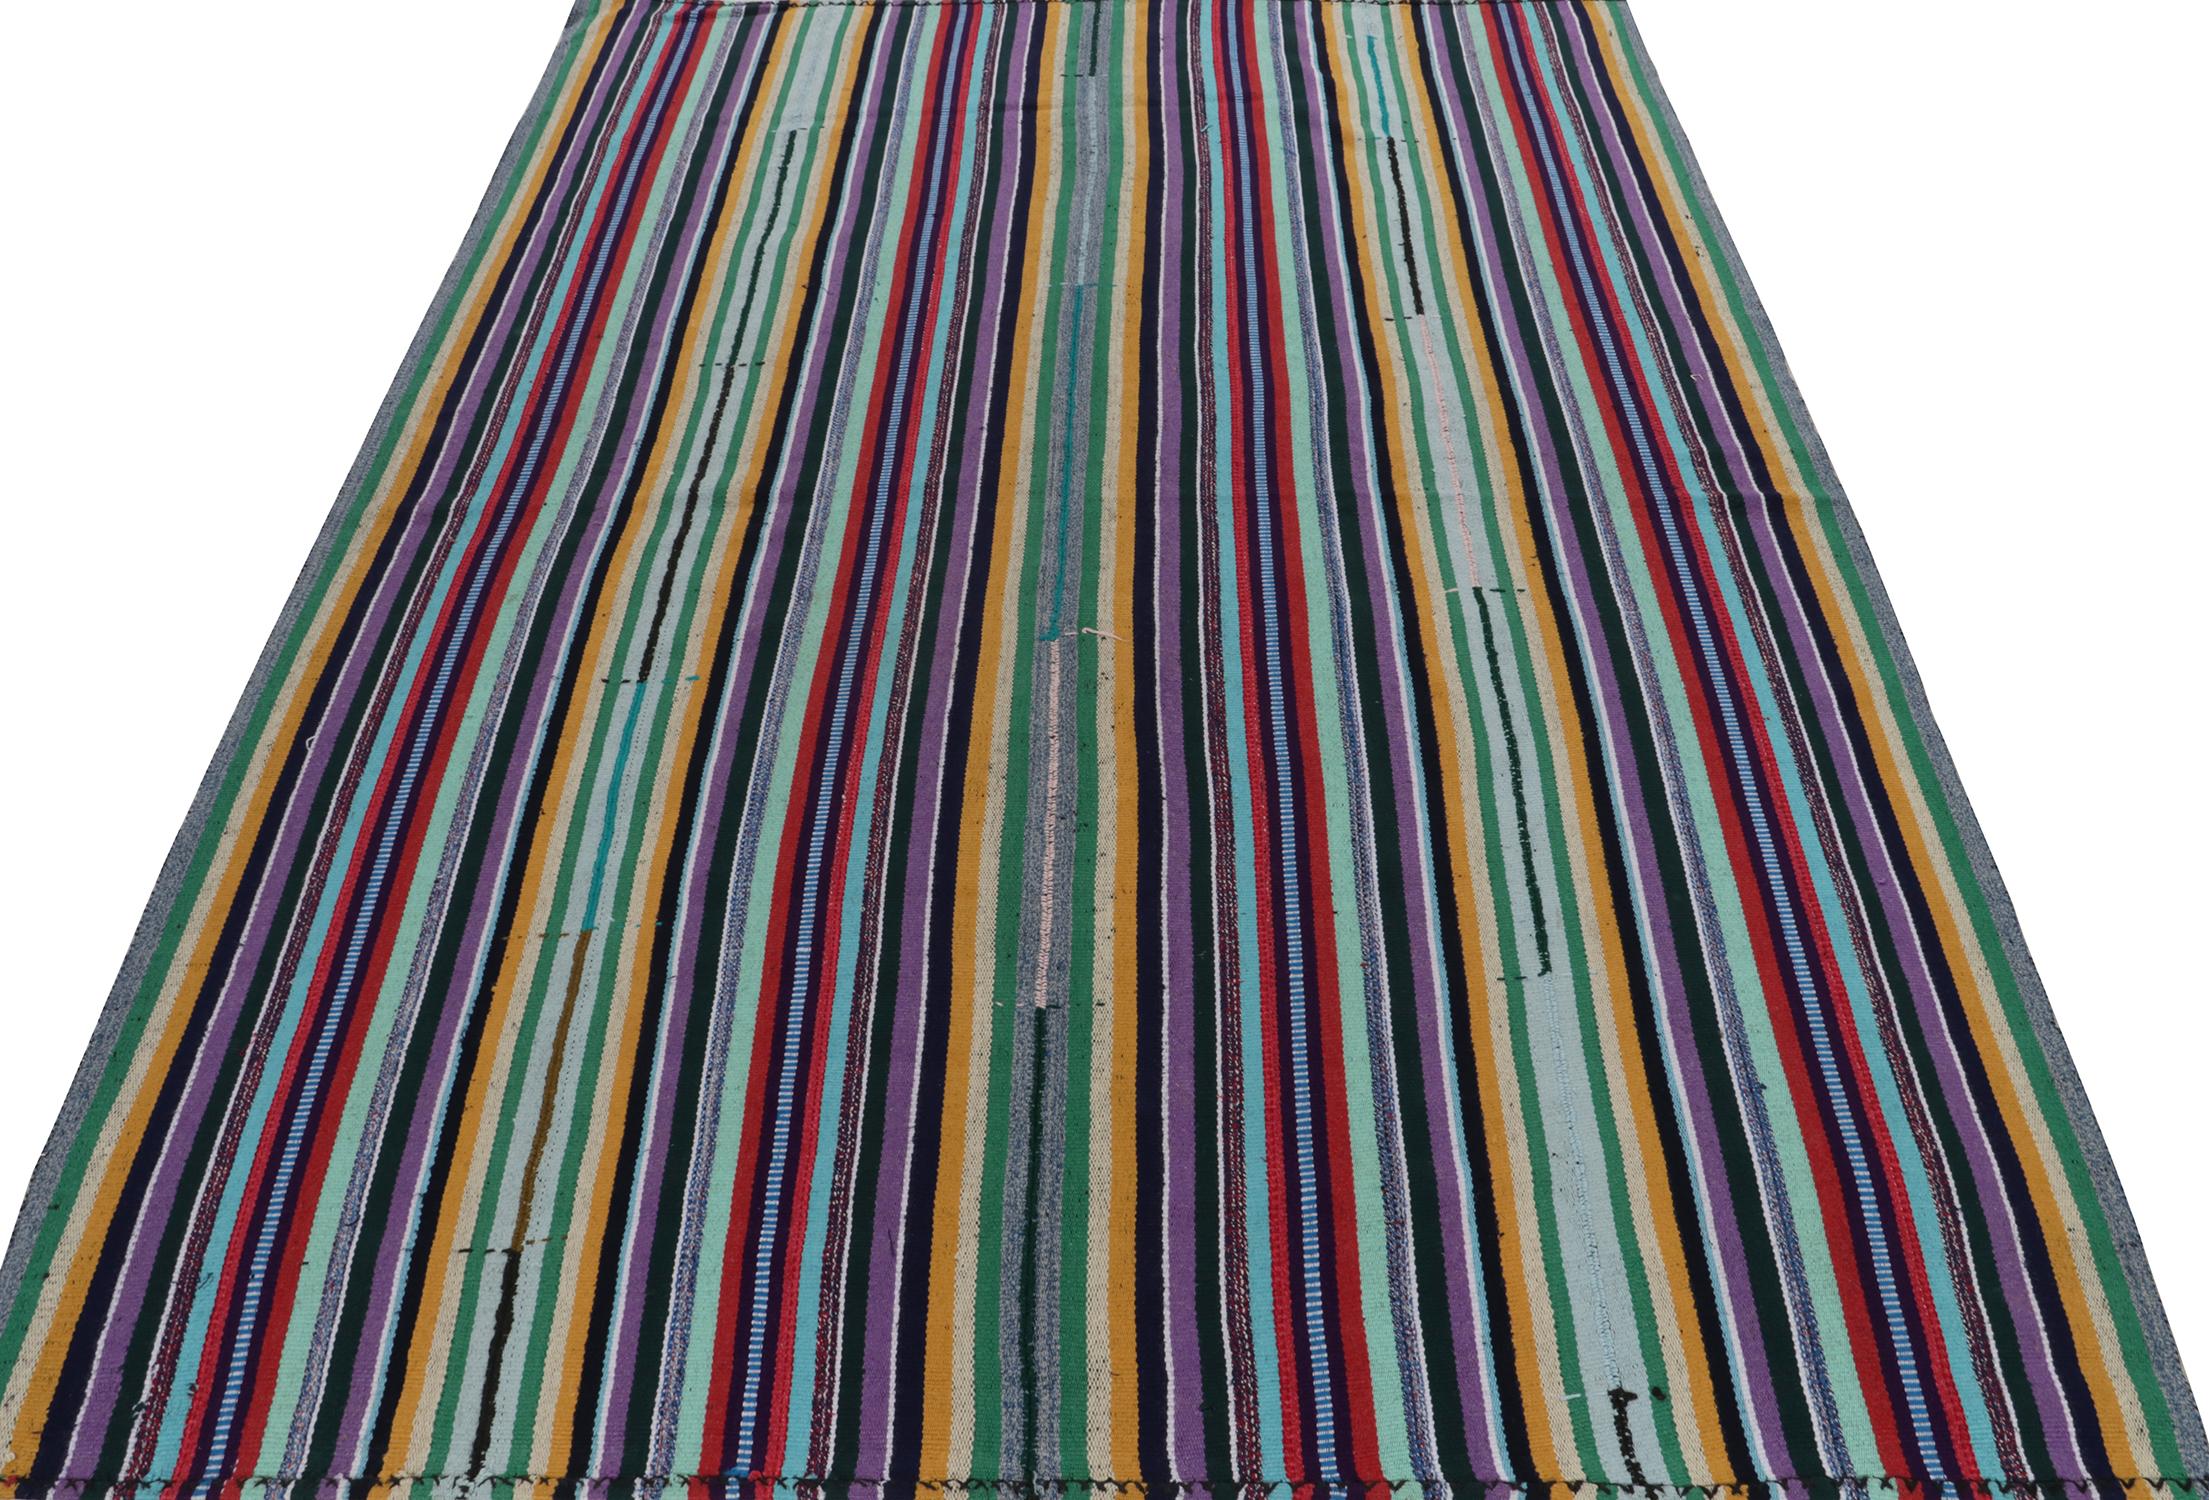 Coming from Turkey circa 1950-1960, a bold type of chaput kilim rug style now entering our vintage flat weave curations. Boasting fine detailing with the colors within the polychromatic stripes, the light & refreshing piece plays predominantly in